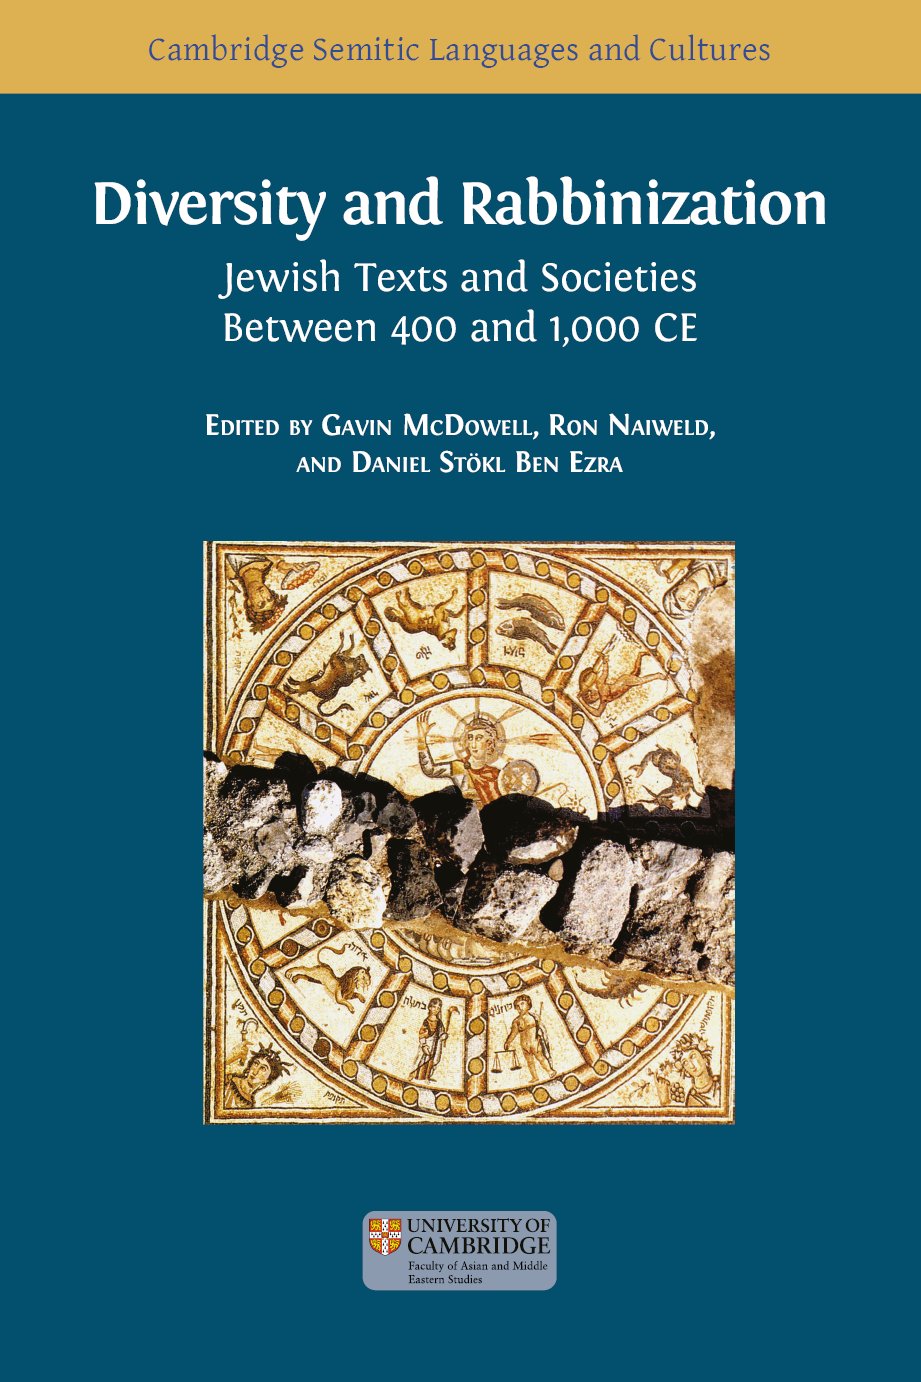 Diversity and Rabbinization book cover image